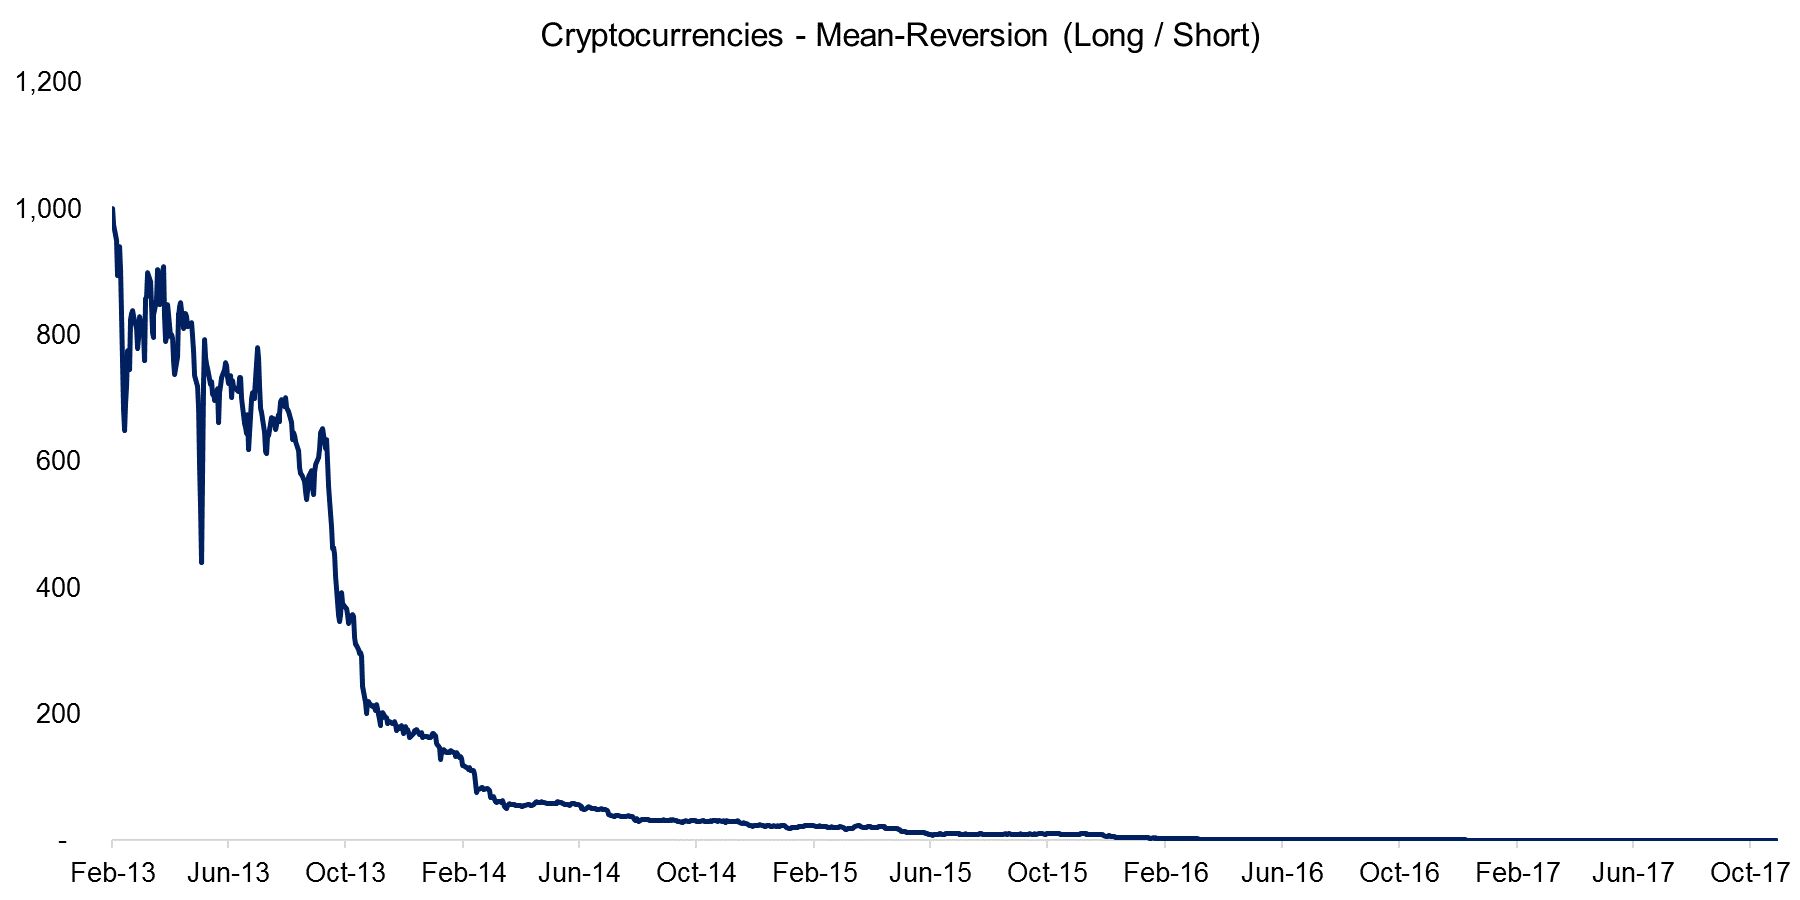 Cryptocurrencies - Mean-Reversion (Long - Short)